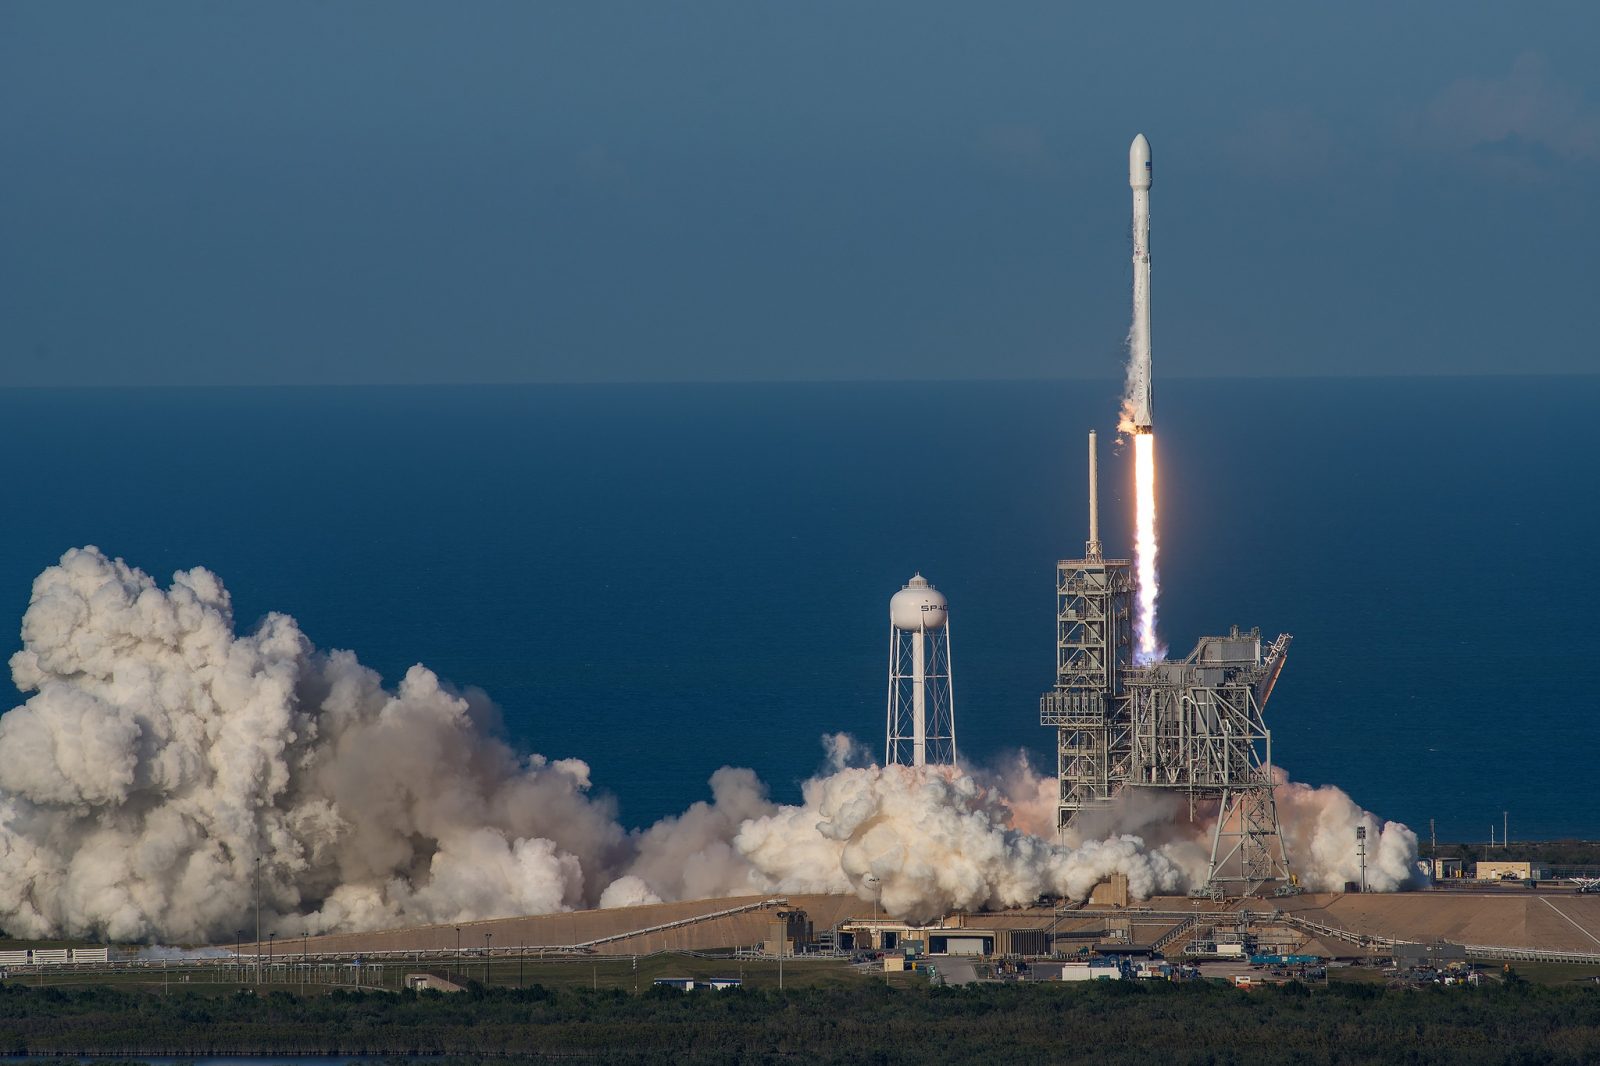 Background image: Spacex 1